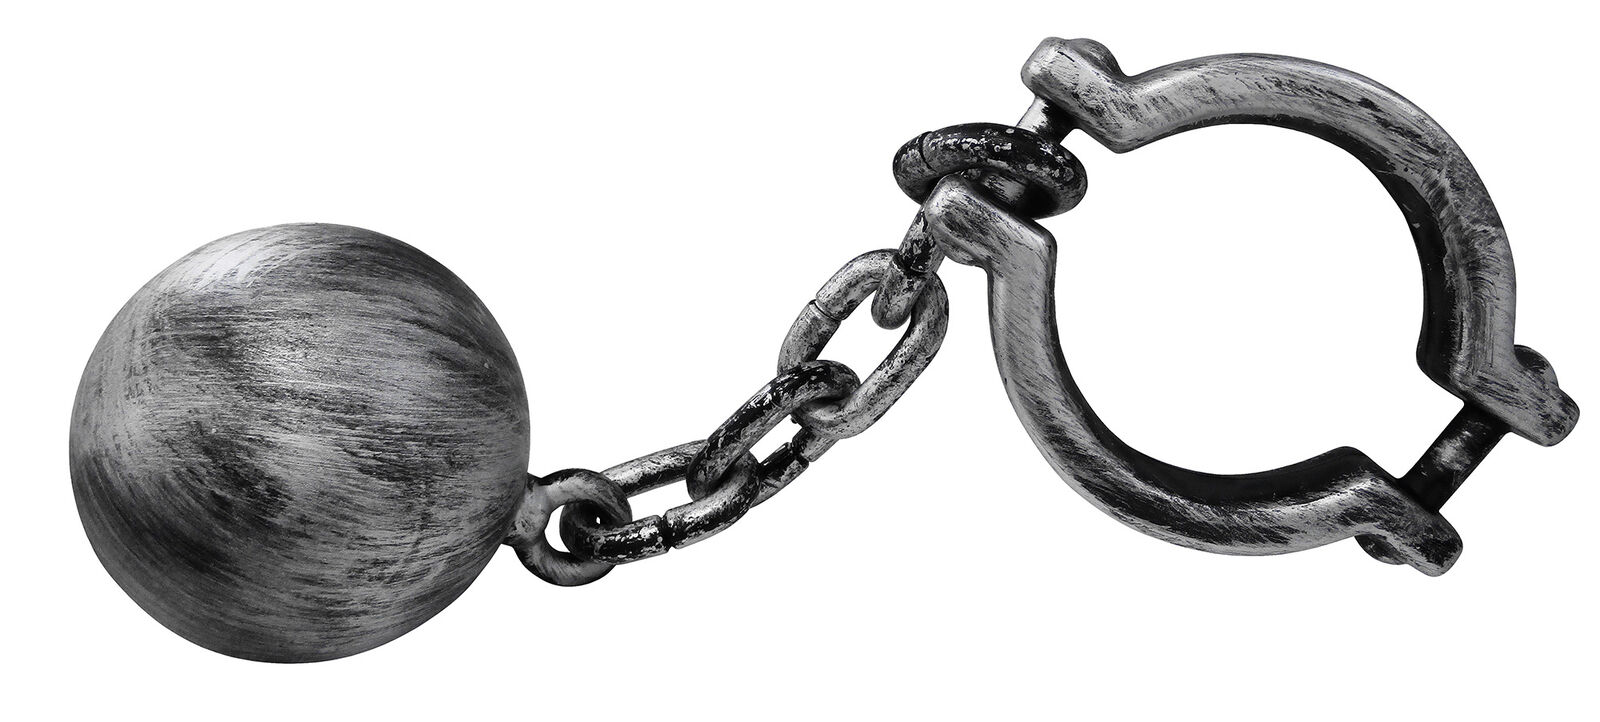 Adult Ball and Chain Leg Shackle Convict Prisoner Inmate Costume Accessory Prop